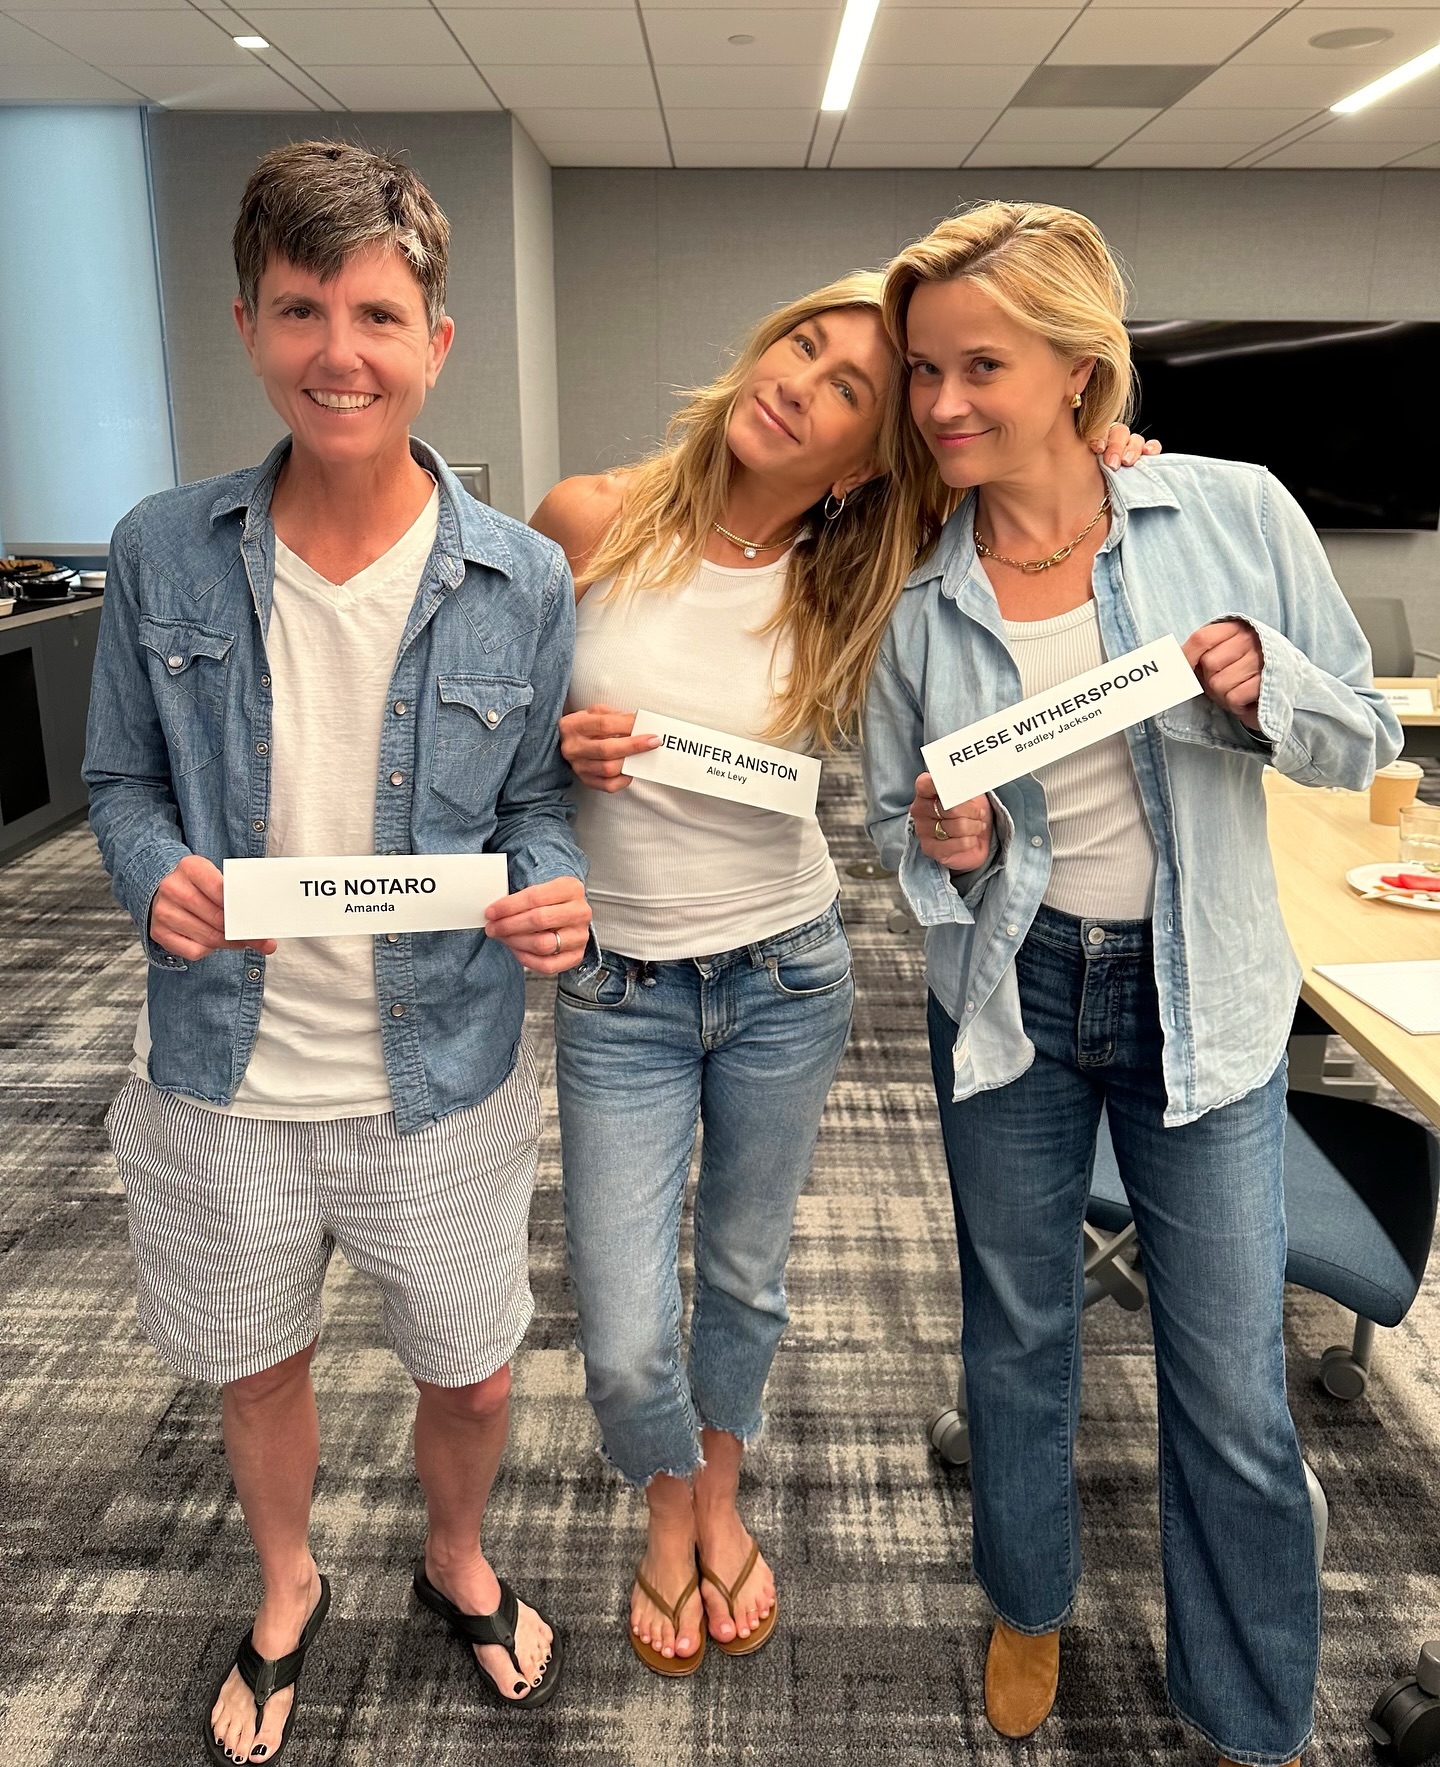 Jennifer shared this photo with co-stars Tig Notaro and Reese Witherspoon on social media